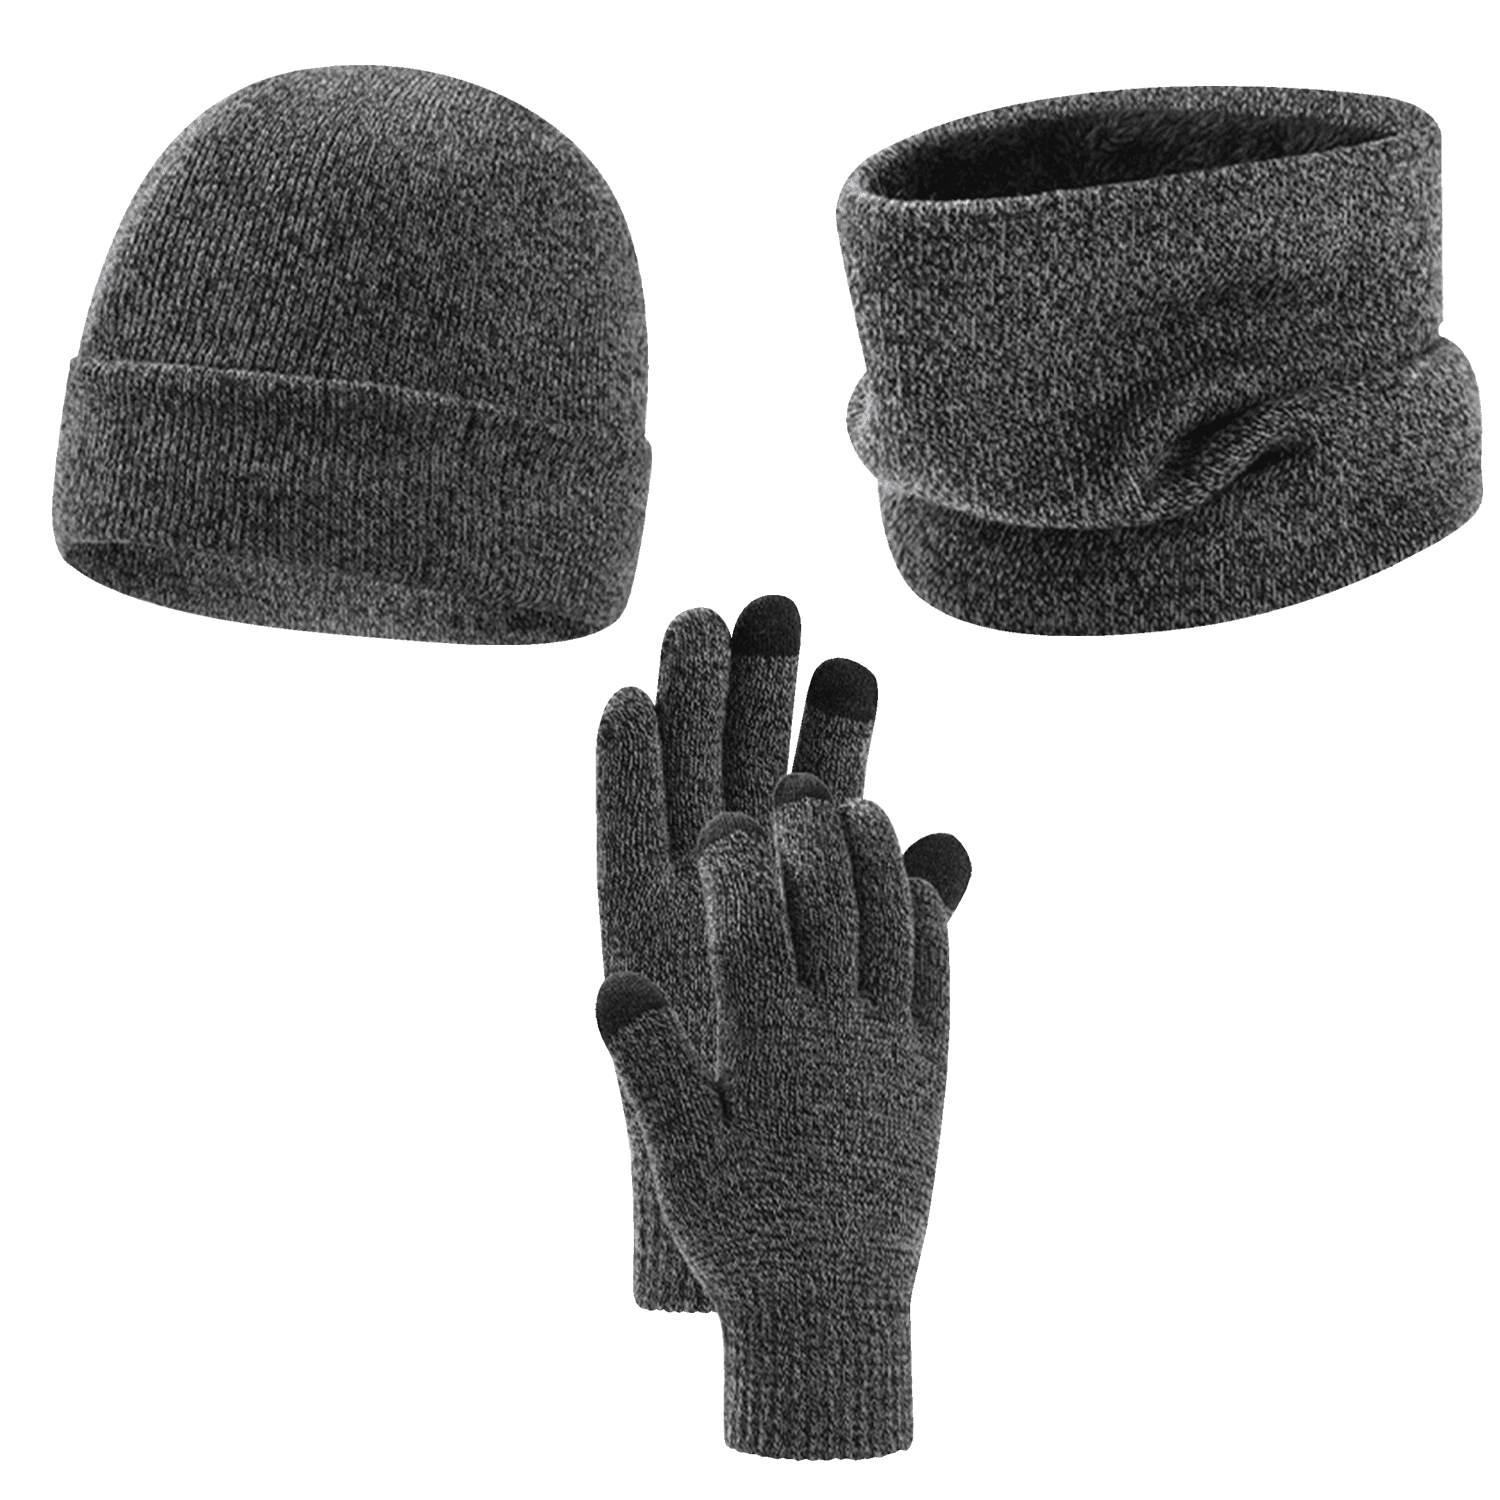 VBIGER Winter Beanie Hat Touchscreen Gloves Neck Warmer Scarf Set Slouchy Beanie Thinsulate Gloves for Men and Women 